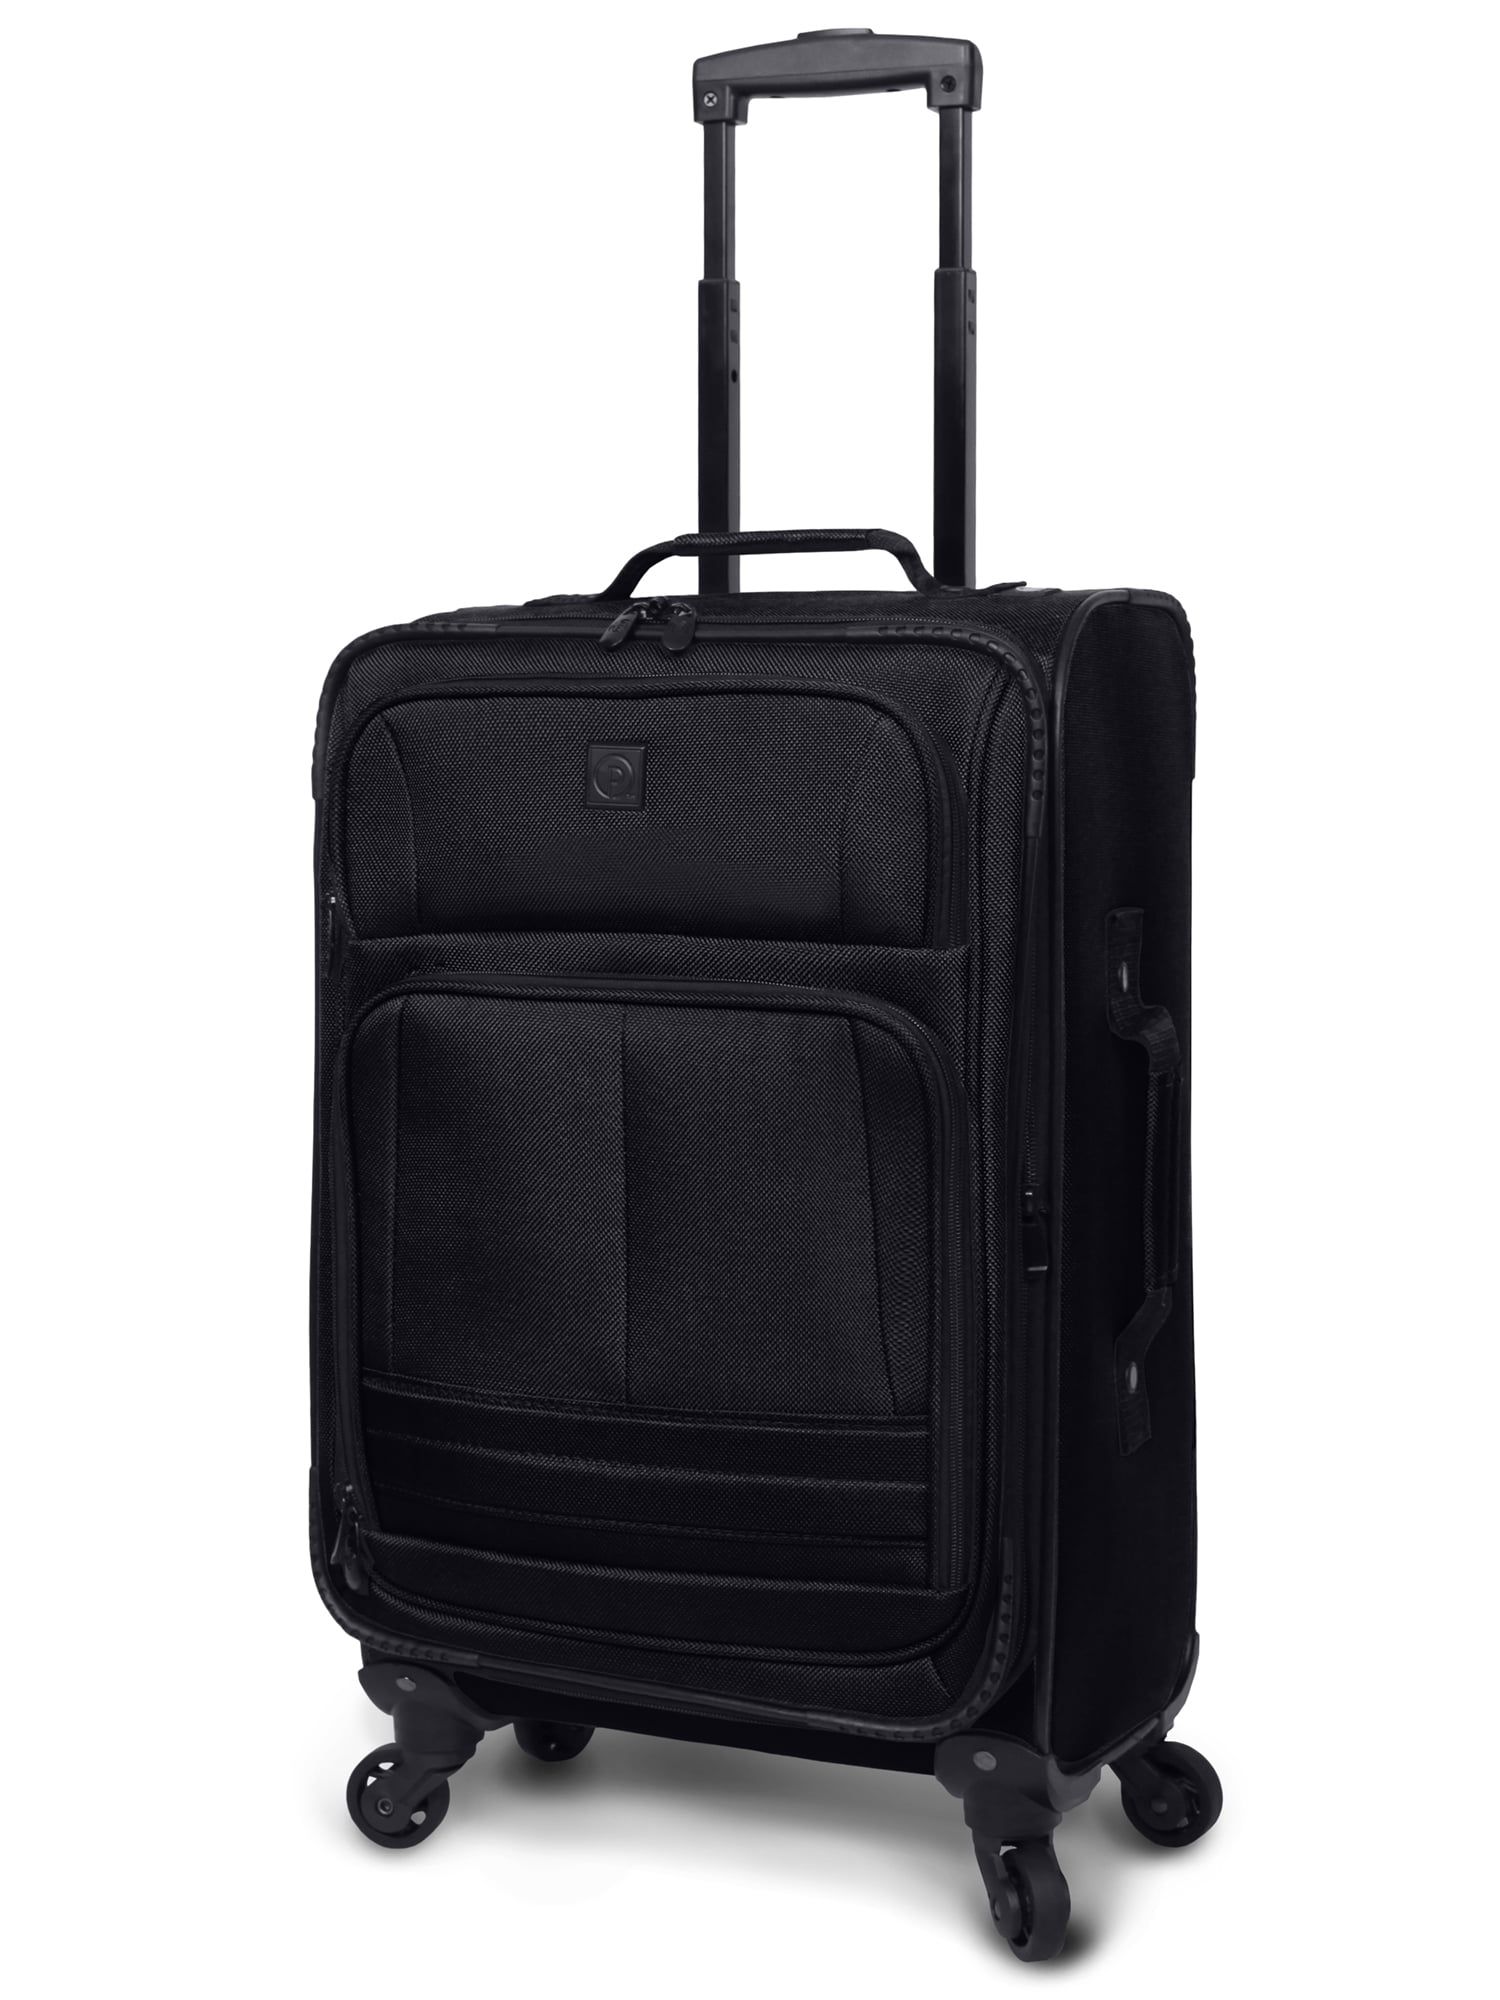 Black Alta 20 Soft-Sided Expandable 2-Wheel Checked Luggage